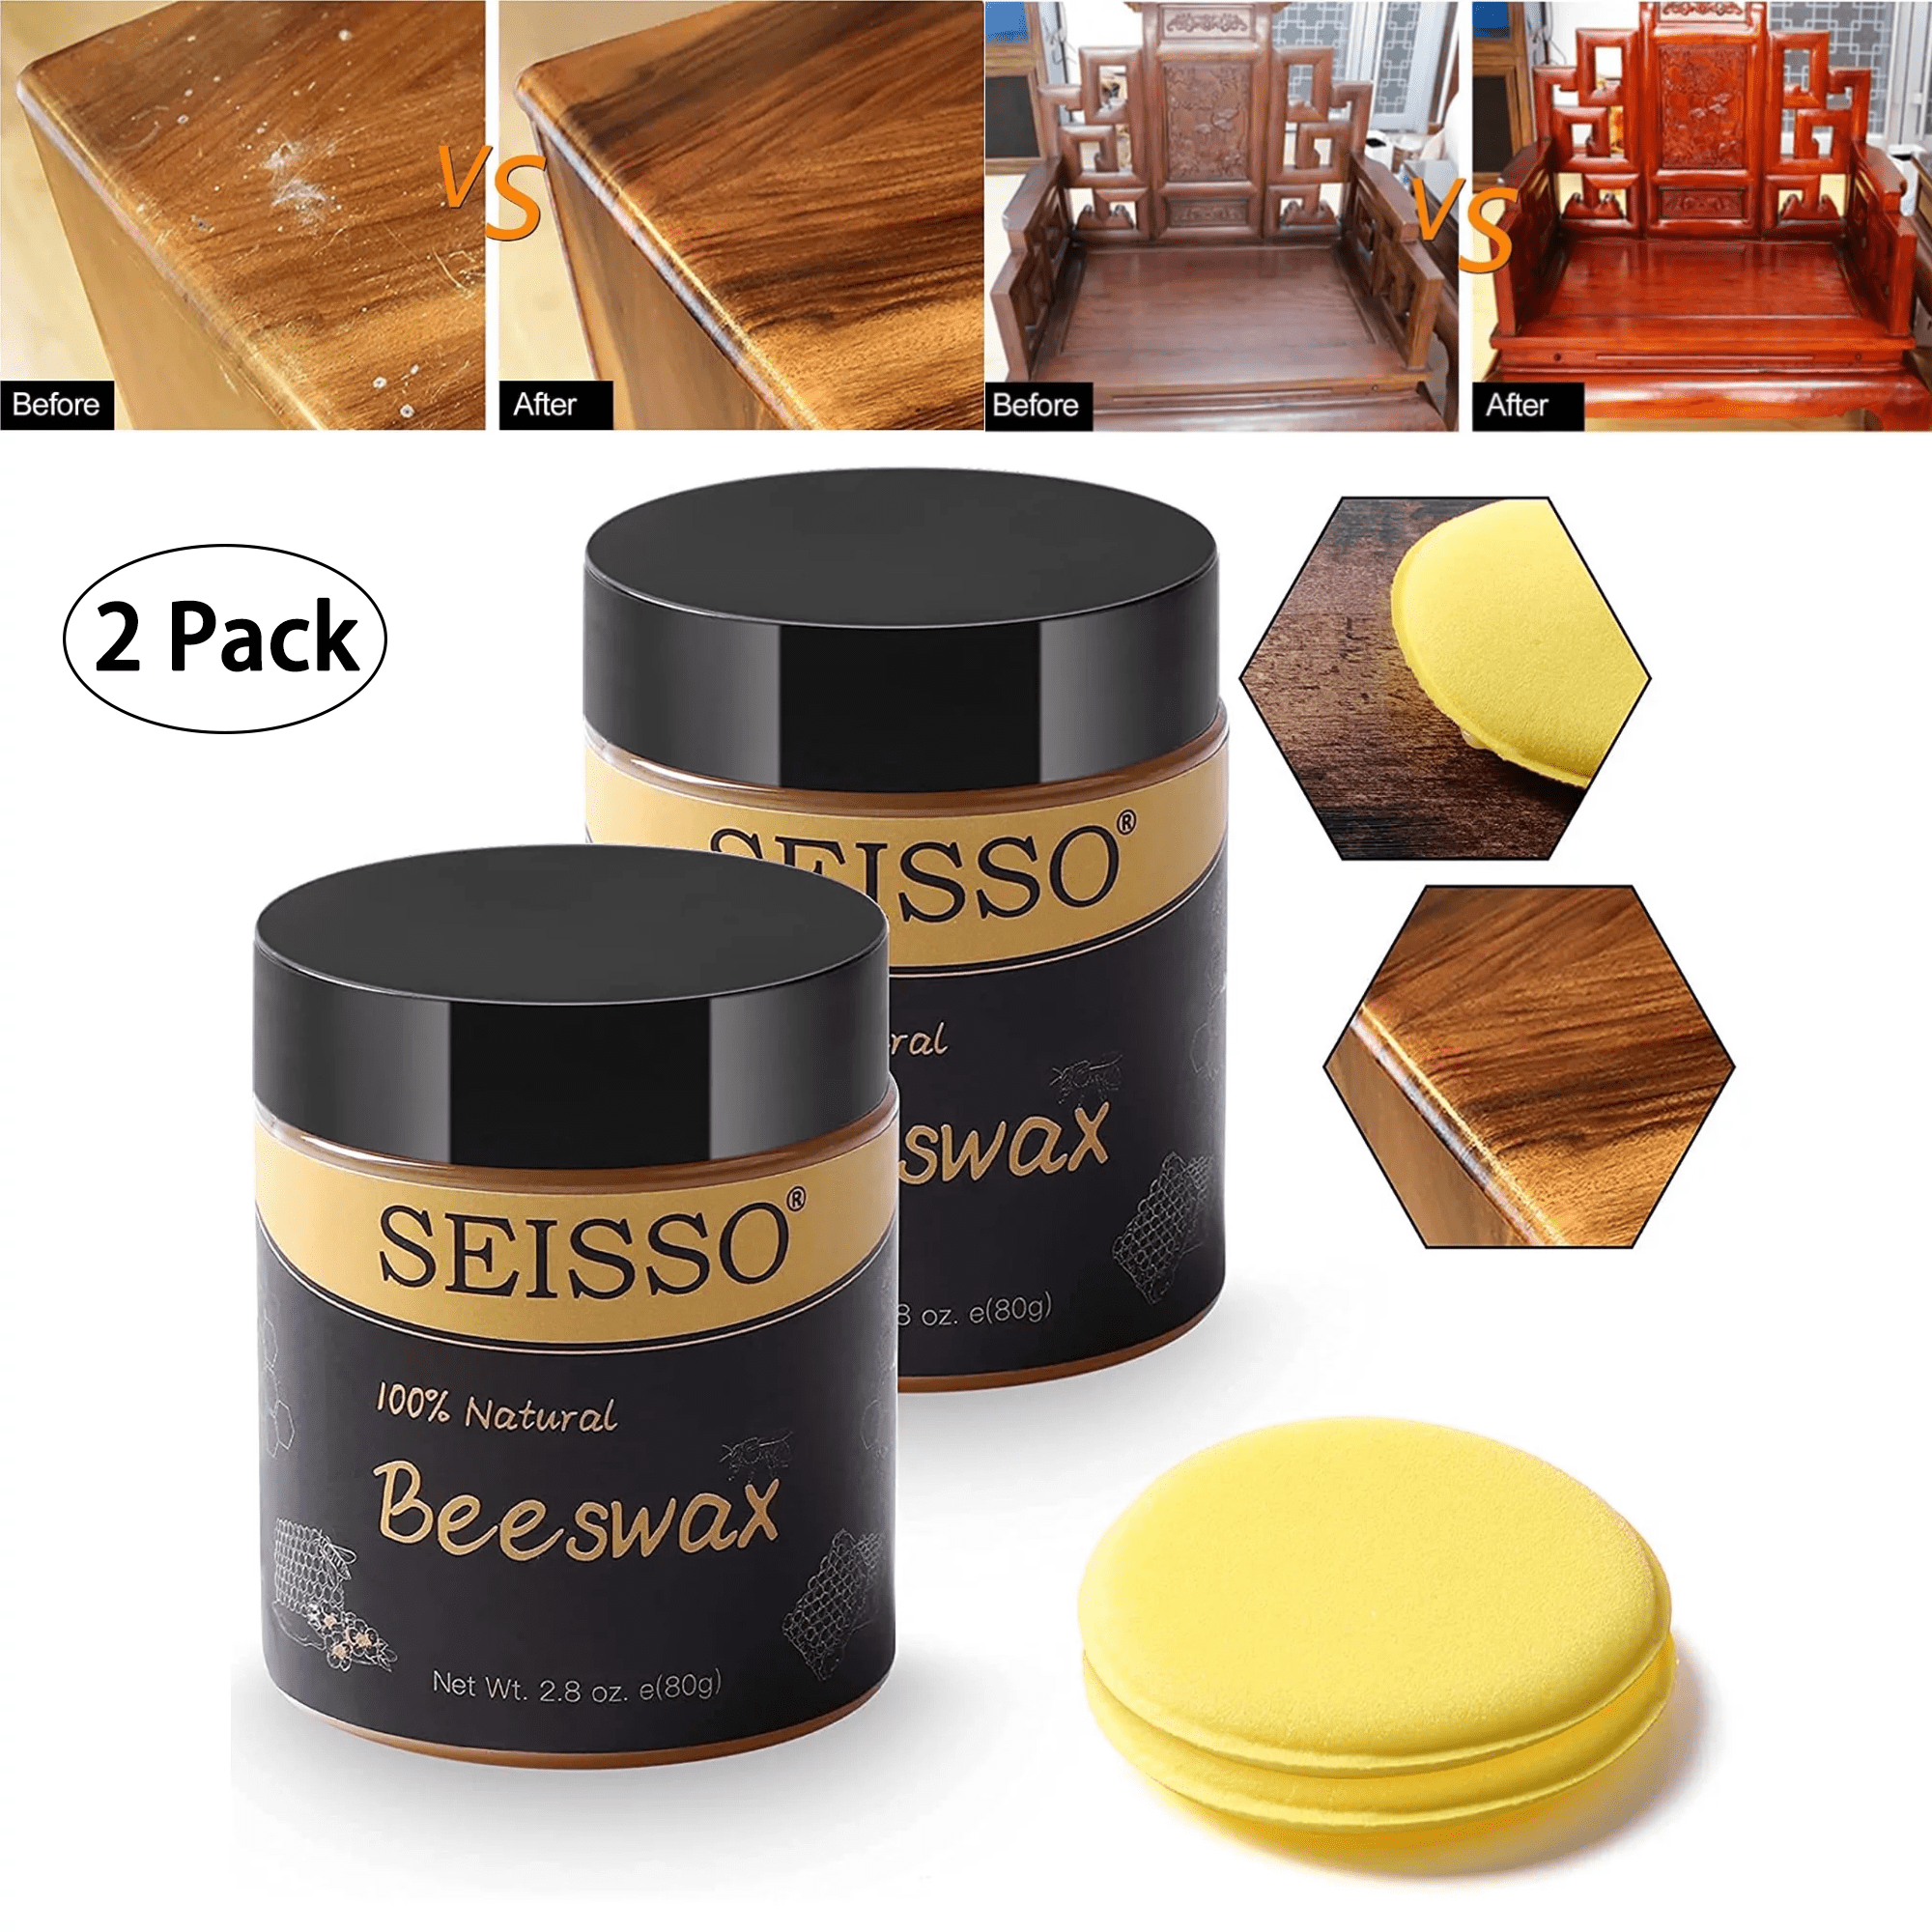  Natural Micro-Molecularized Beeswax Spray Furniture Polish,  Beeswax For Wood Beeswax Spray For Wood Floors, Furniture Care, Used for  Floor Table Chair Home Furniture to Shine and Protect 120ML (3PC) : Health